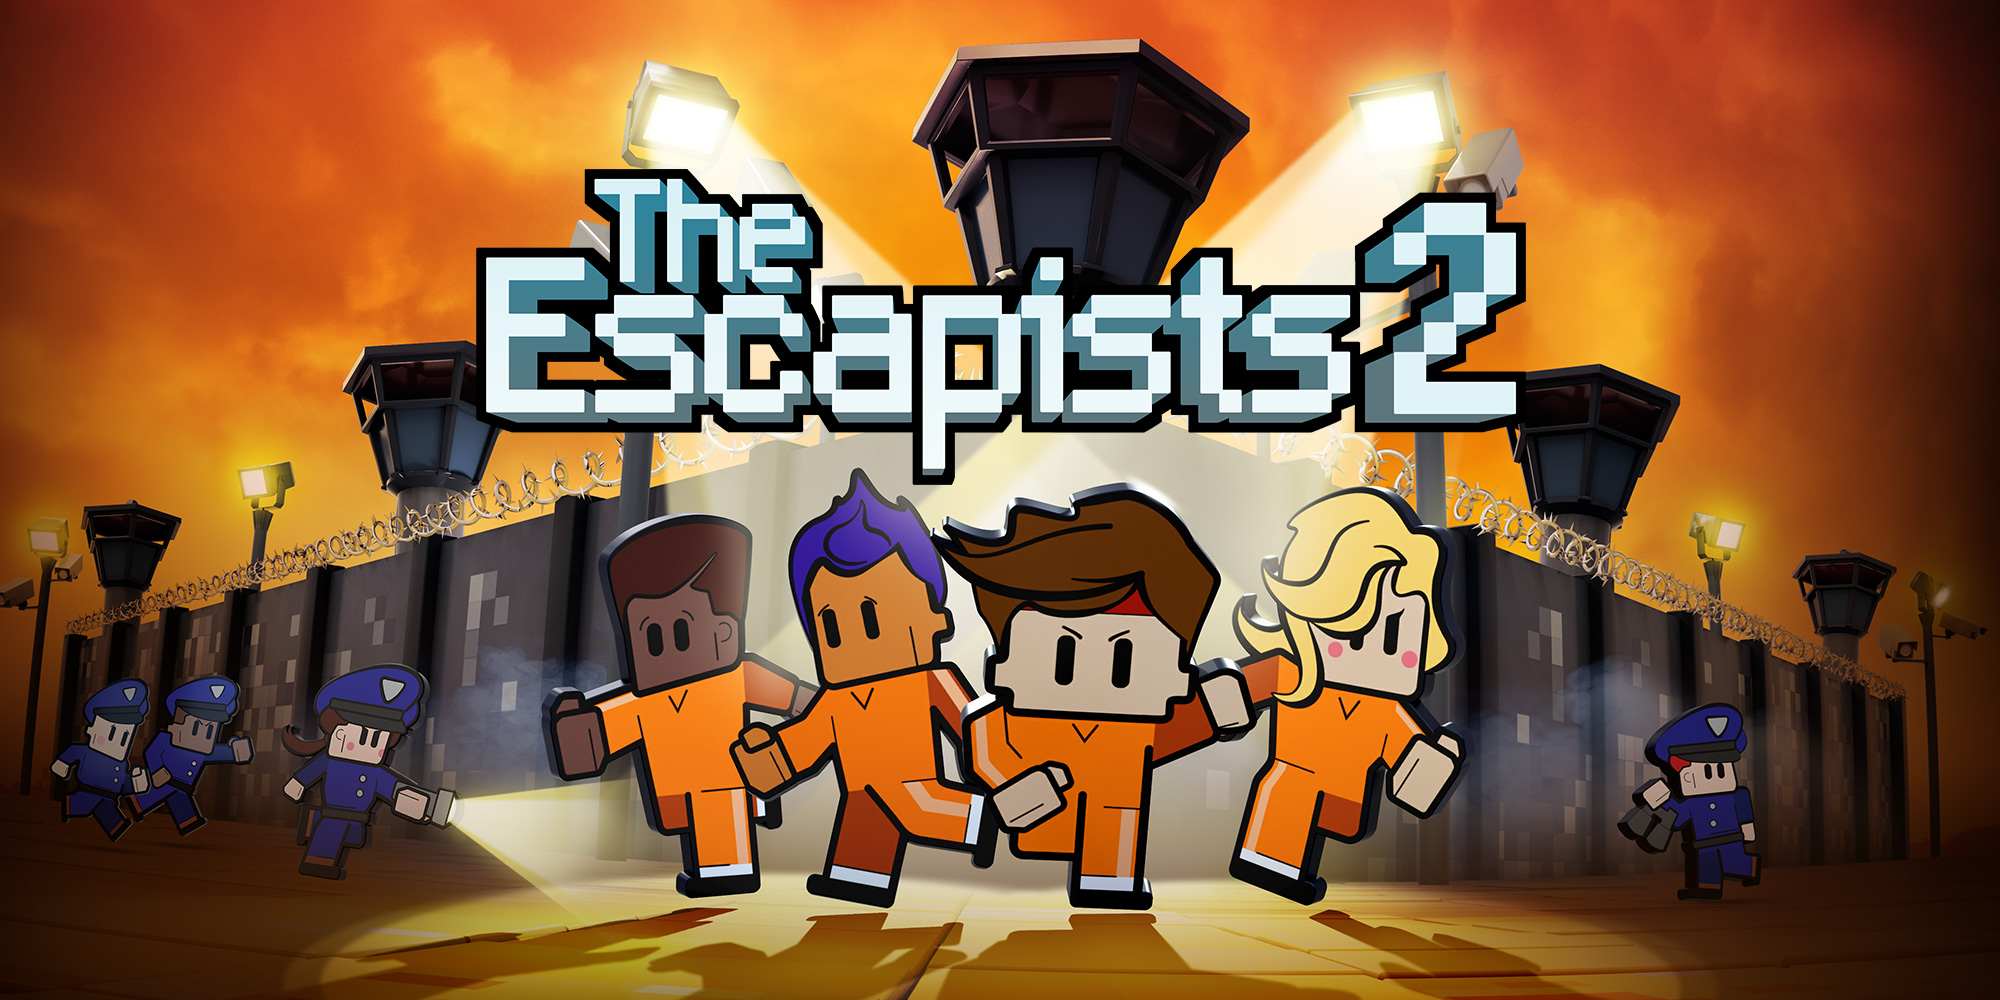 H2x1_NSwitchDS_TheEscapists2.jpg